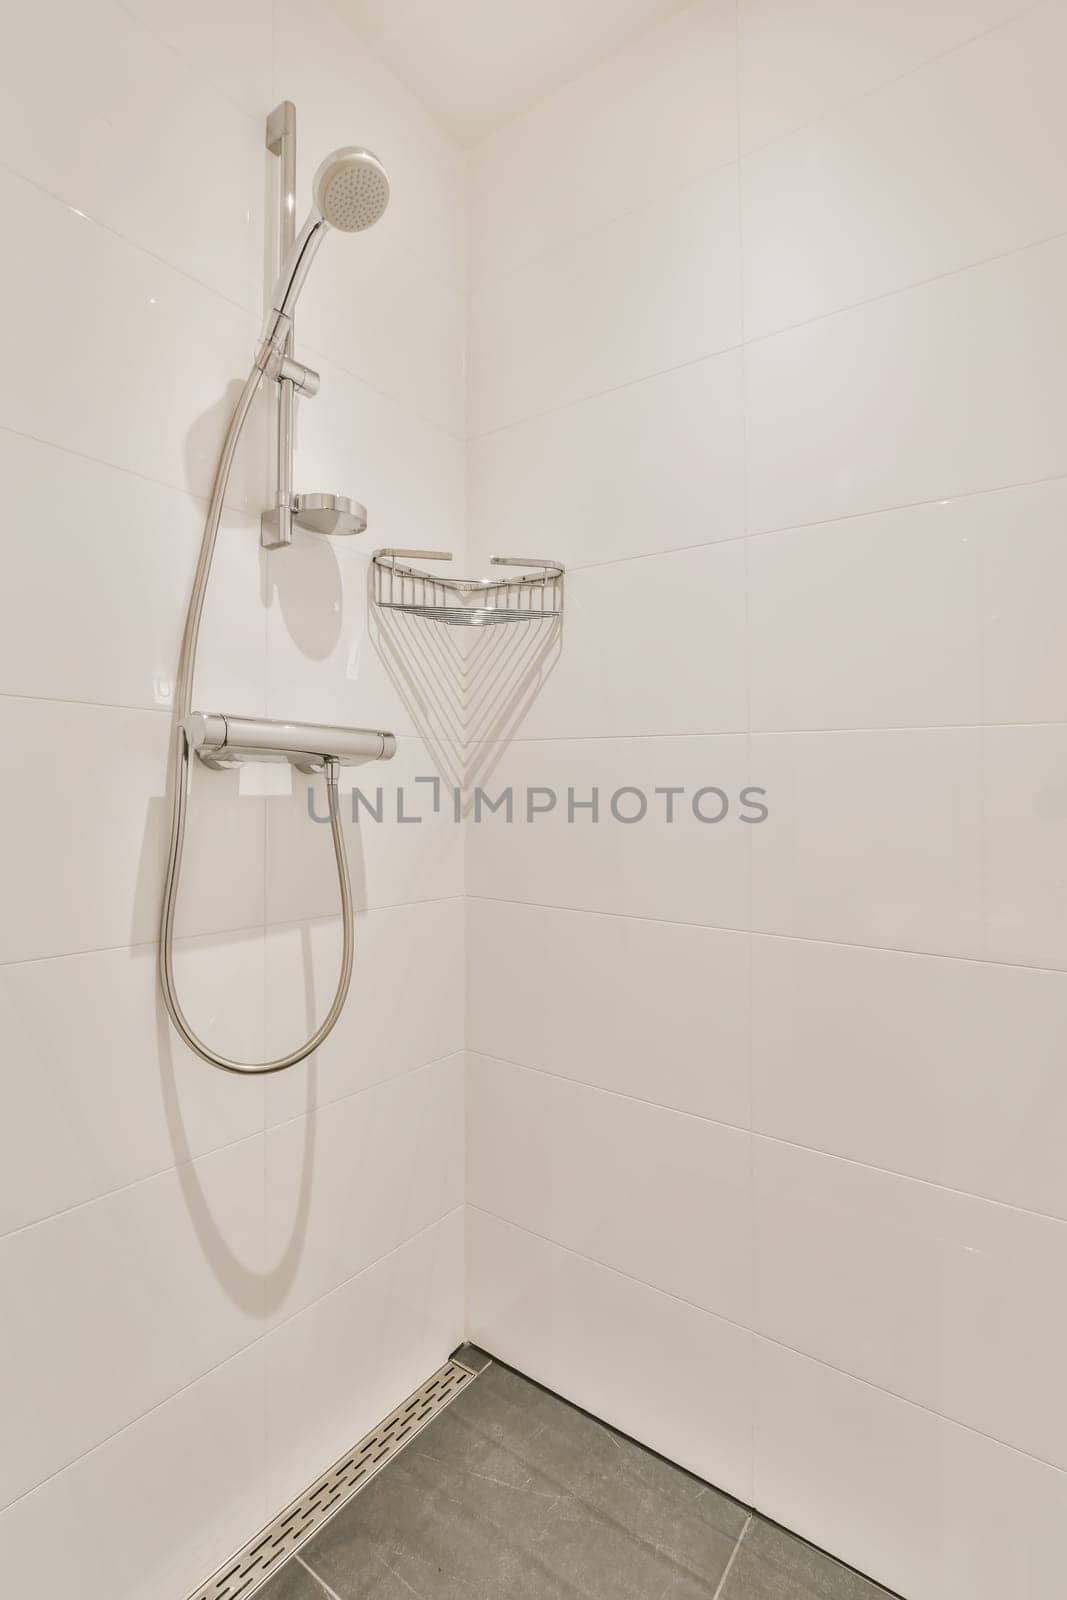 a shower in a white tiled bathroom with grey tile flooring and wall mounted handrails on the walls